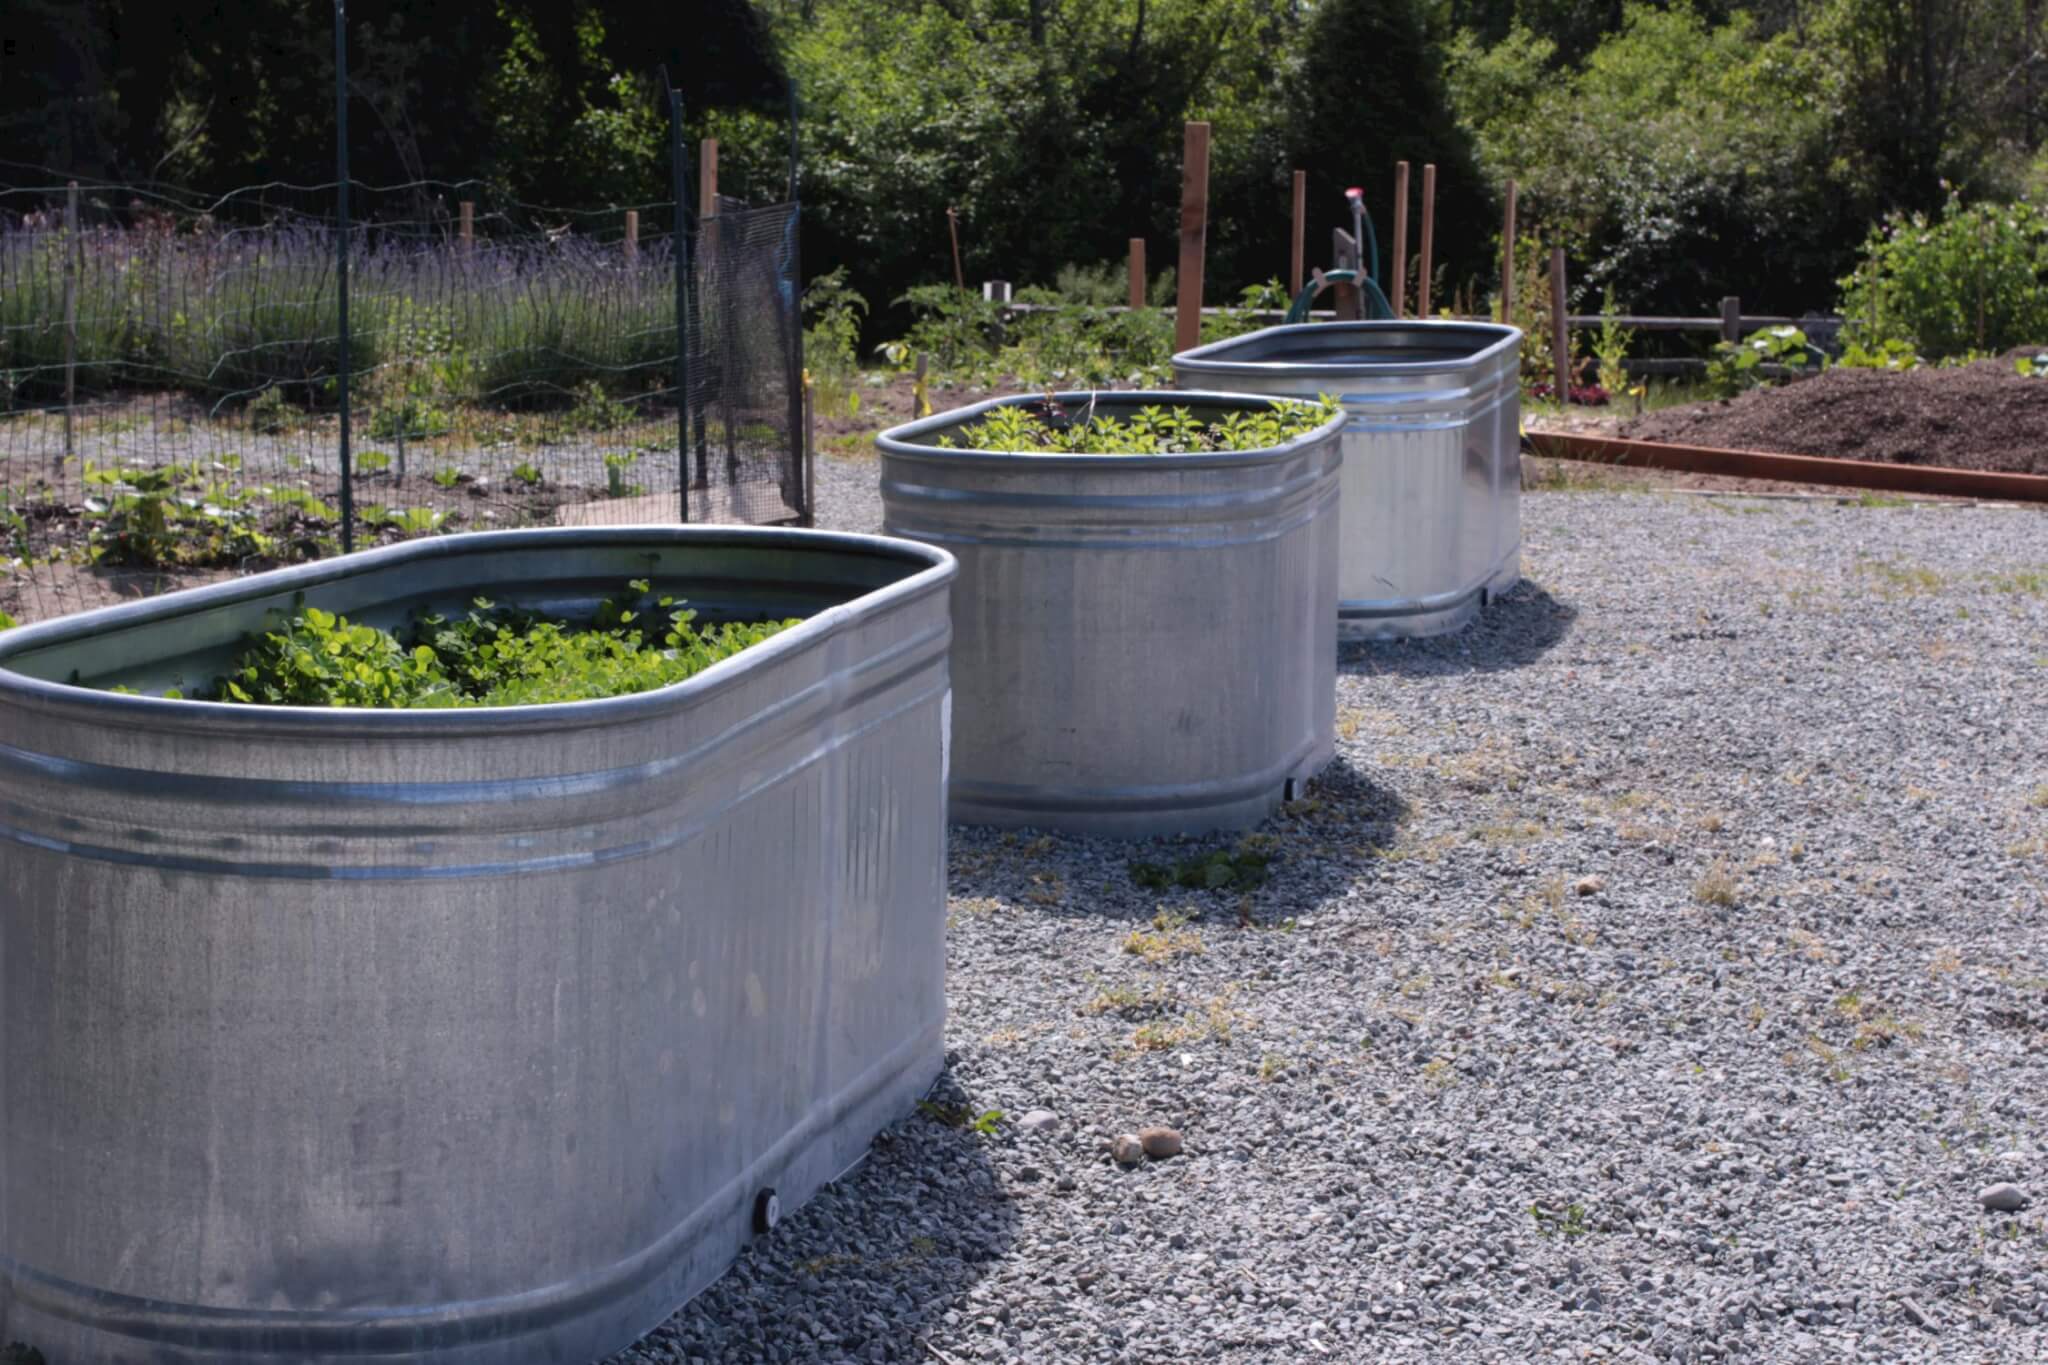 3 troughs in a row. Not much going on with the plants in these, but the placement looks great. Photo by Kane Jamison.